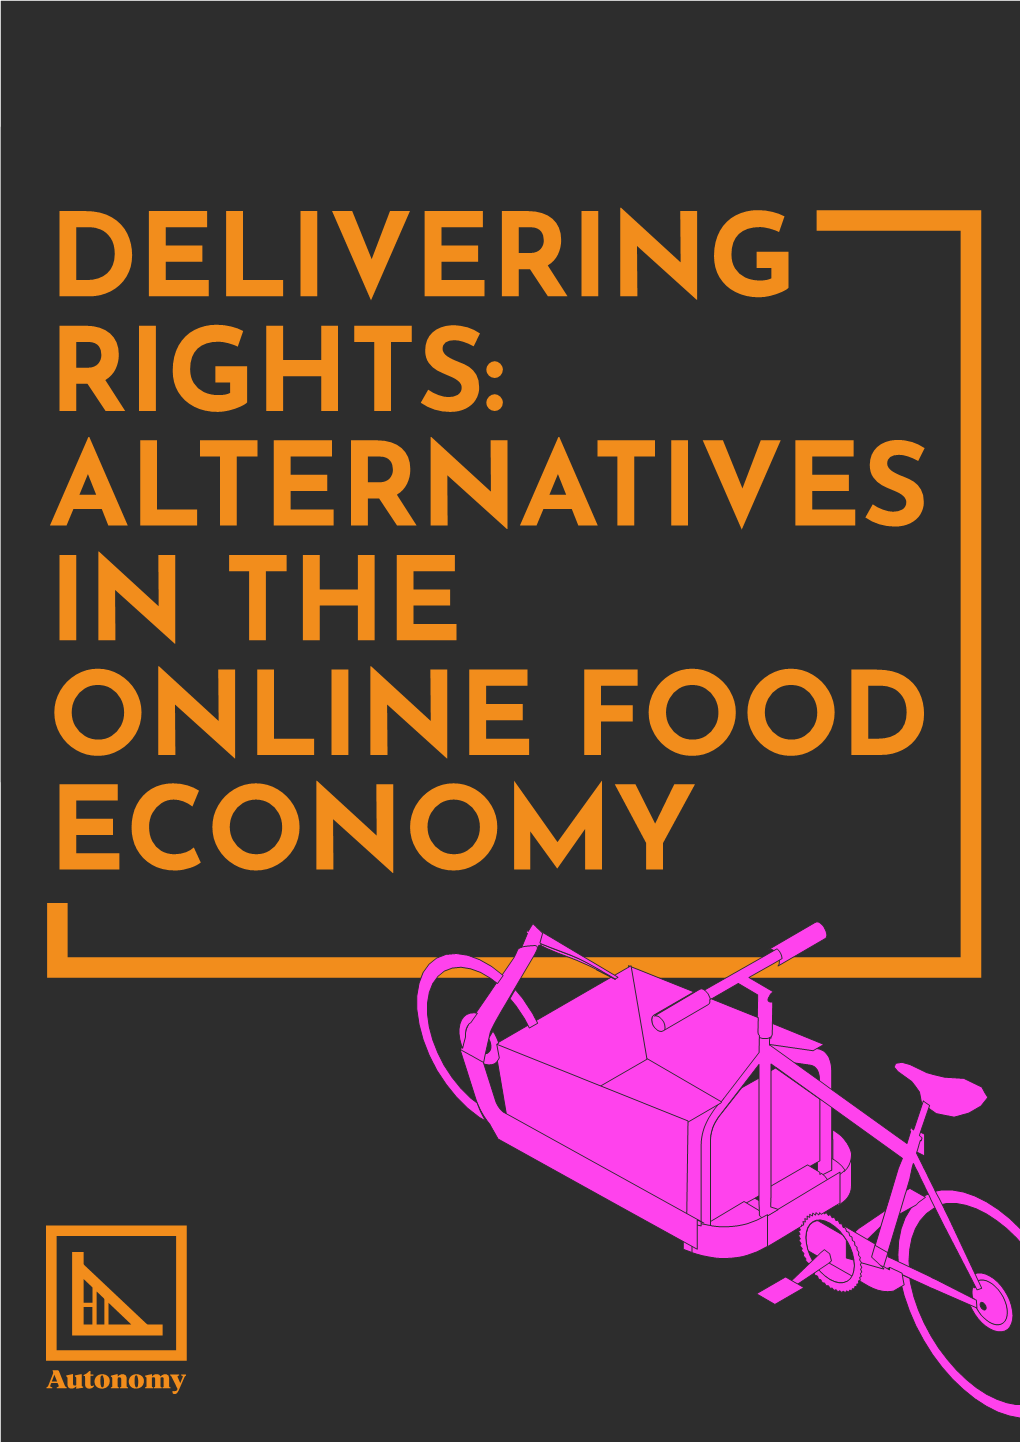 DELIVERING RIGHTS: ALTERNATIVES in the ONLINE FOOD ECONOMY Autonomy Delivering Rights: Alternatives in the Online Food Economy 2